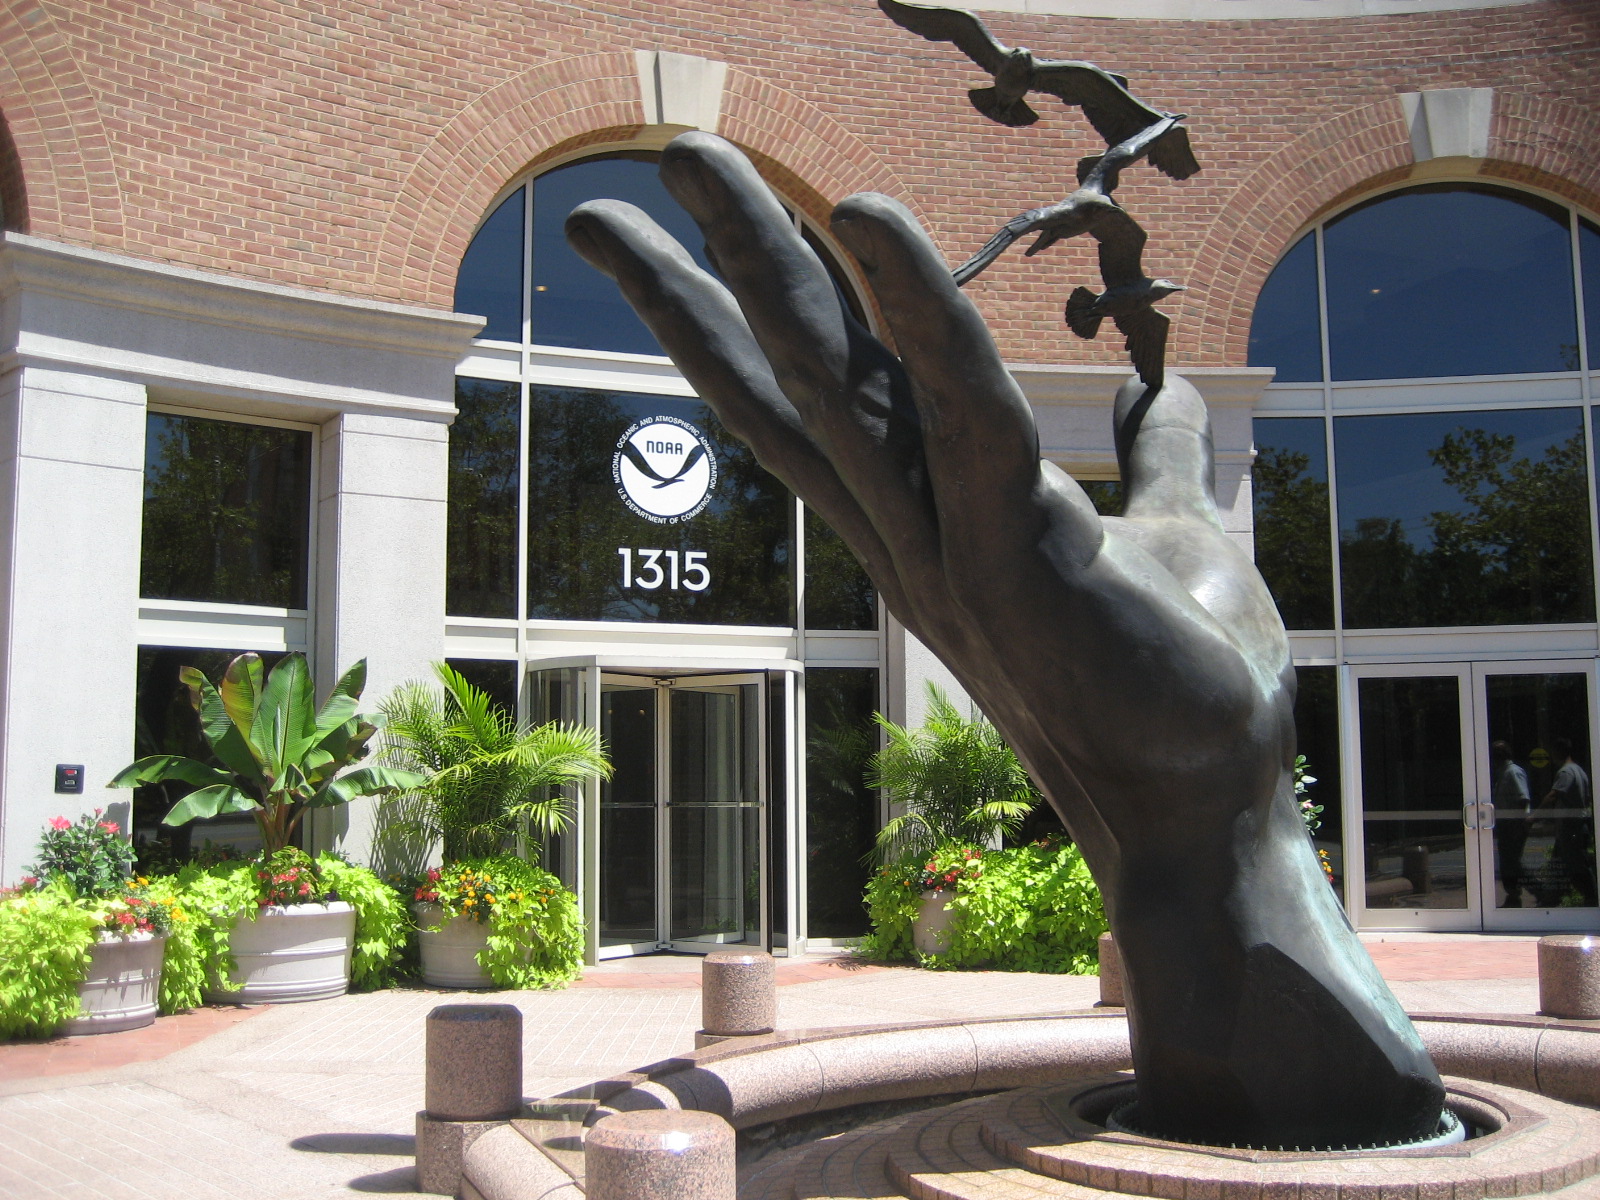 "The Hand" by Ray Kaskey, 1993; 1315 East West Hwy & Colesville Road; Bronze sculpture/fountain 12ftH by 18ftW.